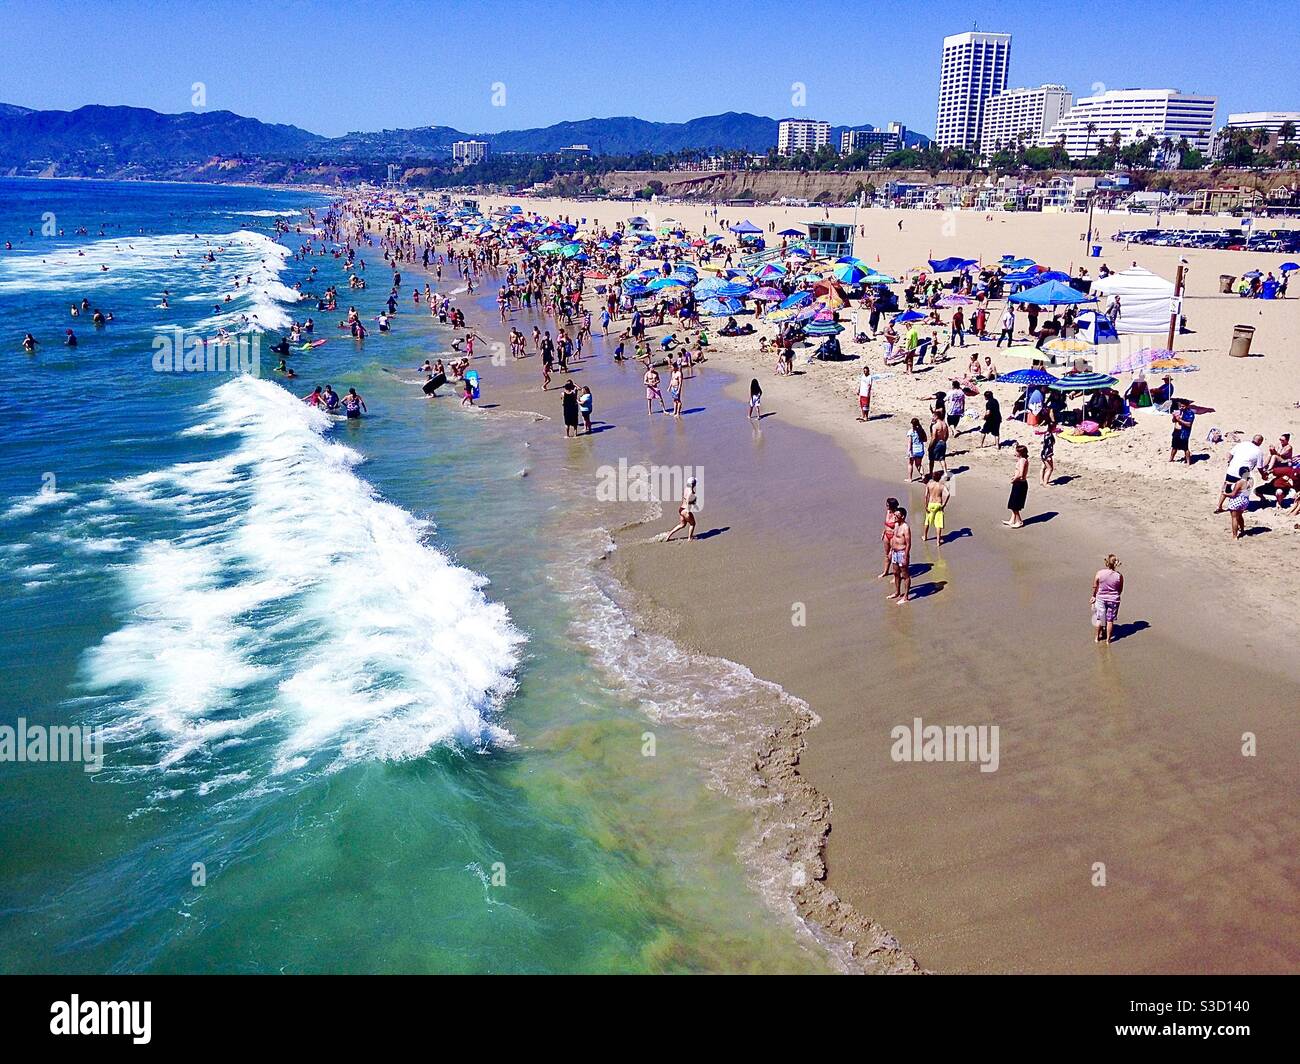 A glorious day to be at the beach! People, pets, surfers, colorful umbrellas and a view of buildings in Santa Monica as well as the hillsides of Malibu make this scene idyllic! Stock Photo